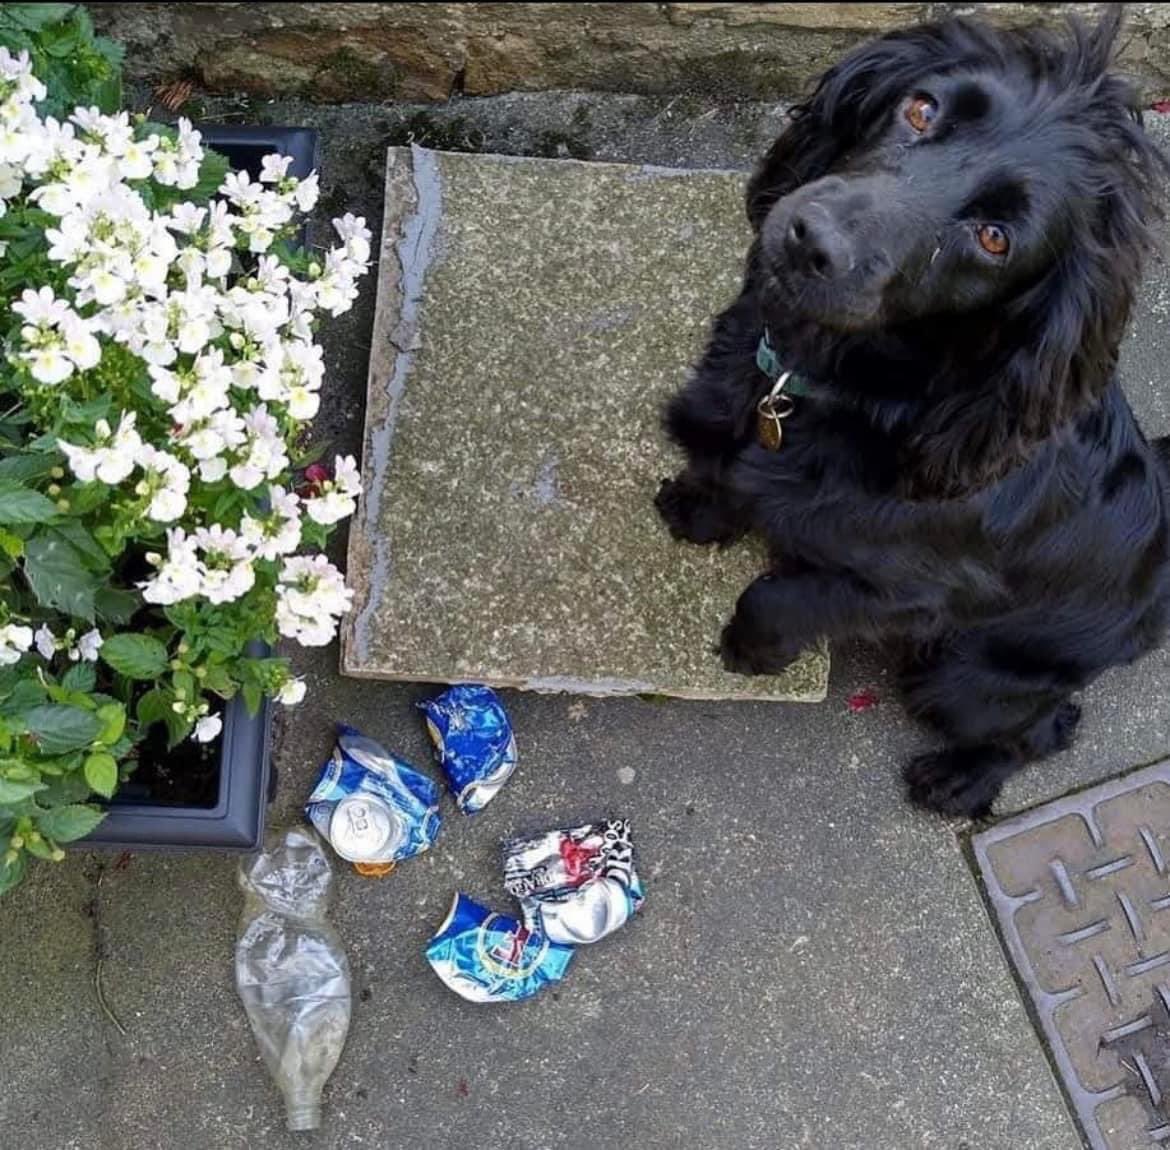 Picking up #litter while walking the dog is a simple idea but so effective where there are lots of us doing it as fewer people drop litter in clean areas

It’s also great for mental health doing something that has an immediate visible impact. Join us!

#mentalhealthawarenessweek